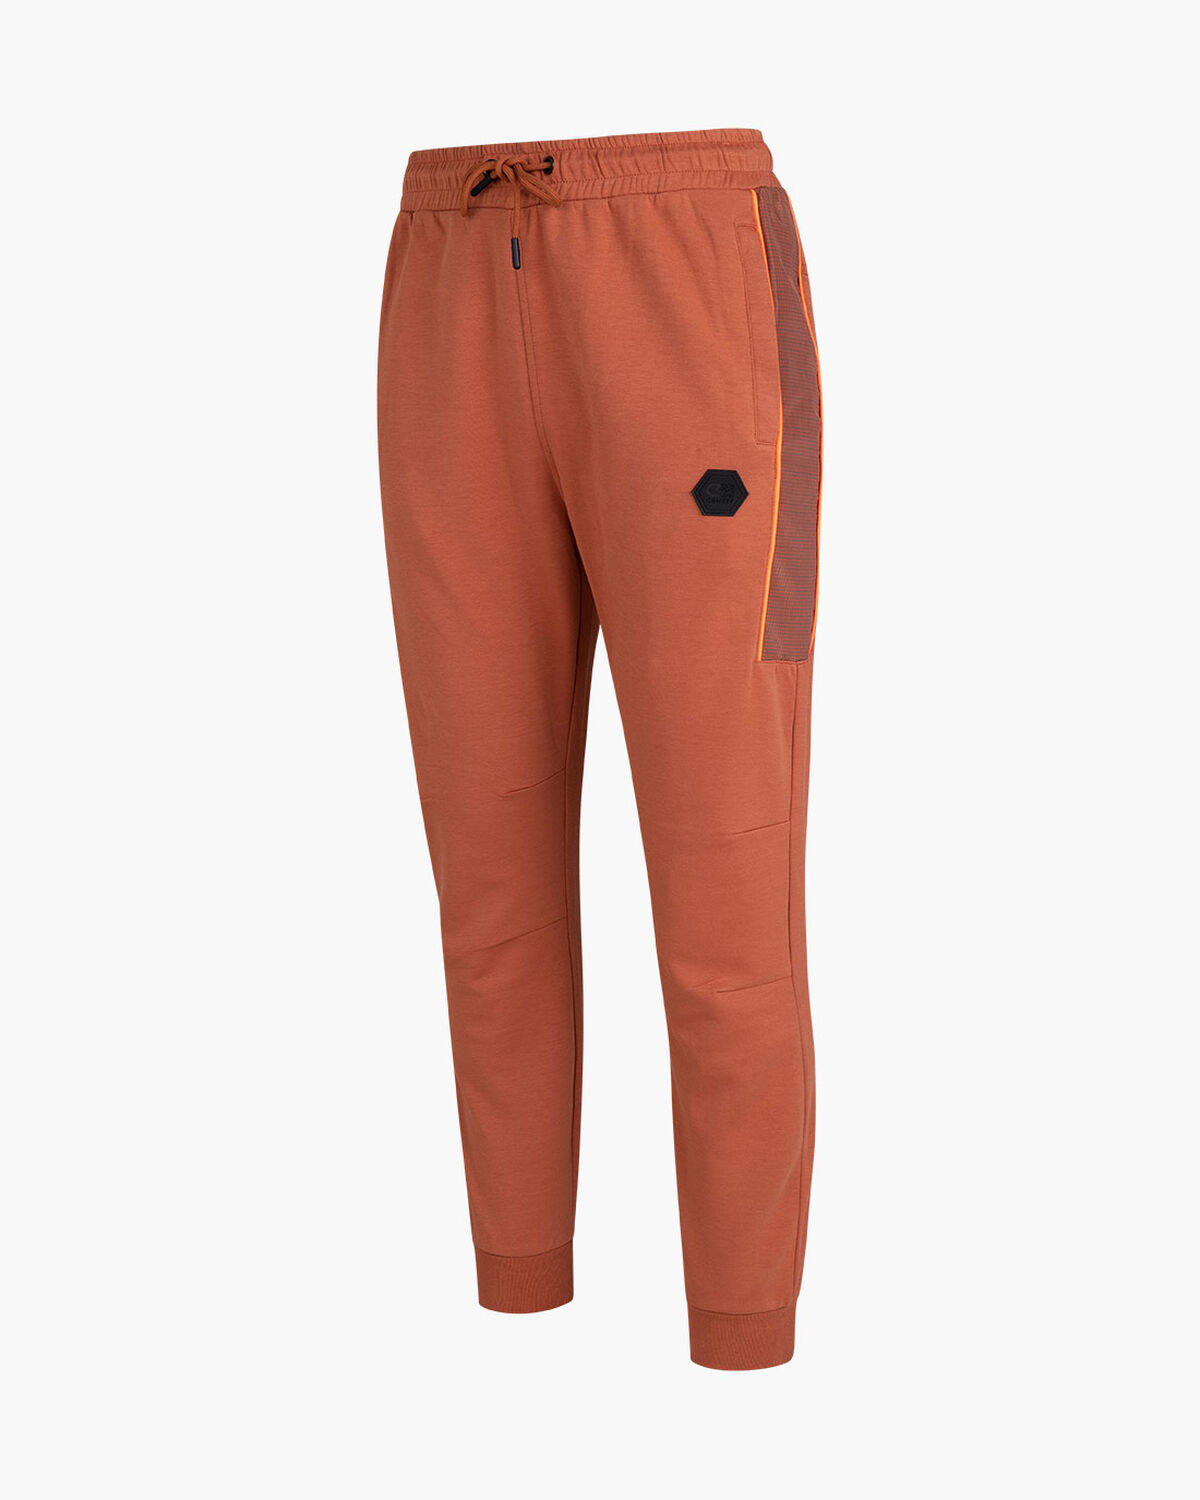 Aiden Track pants - 80% Cotton 20% Polyester, Desert Brown, hi-res